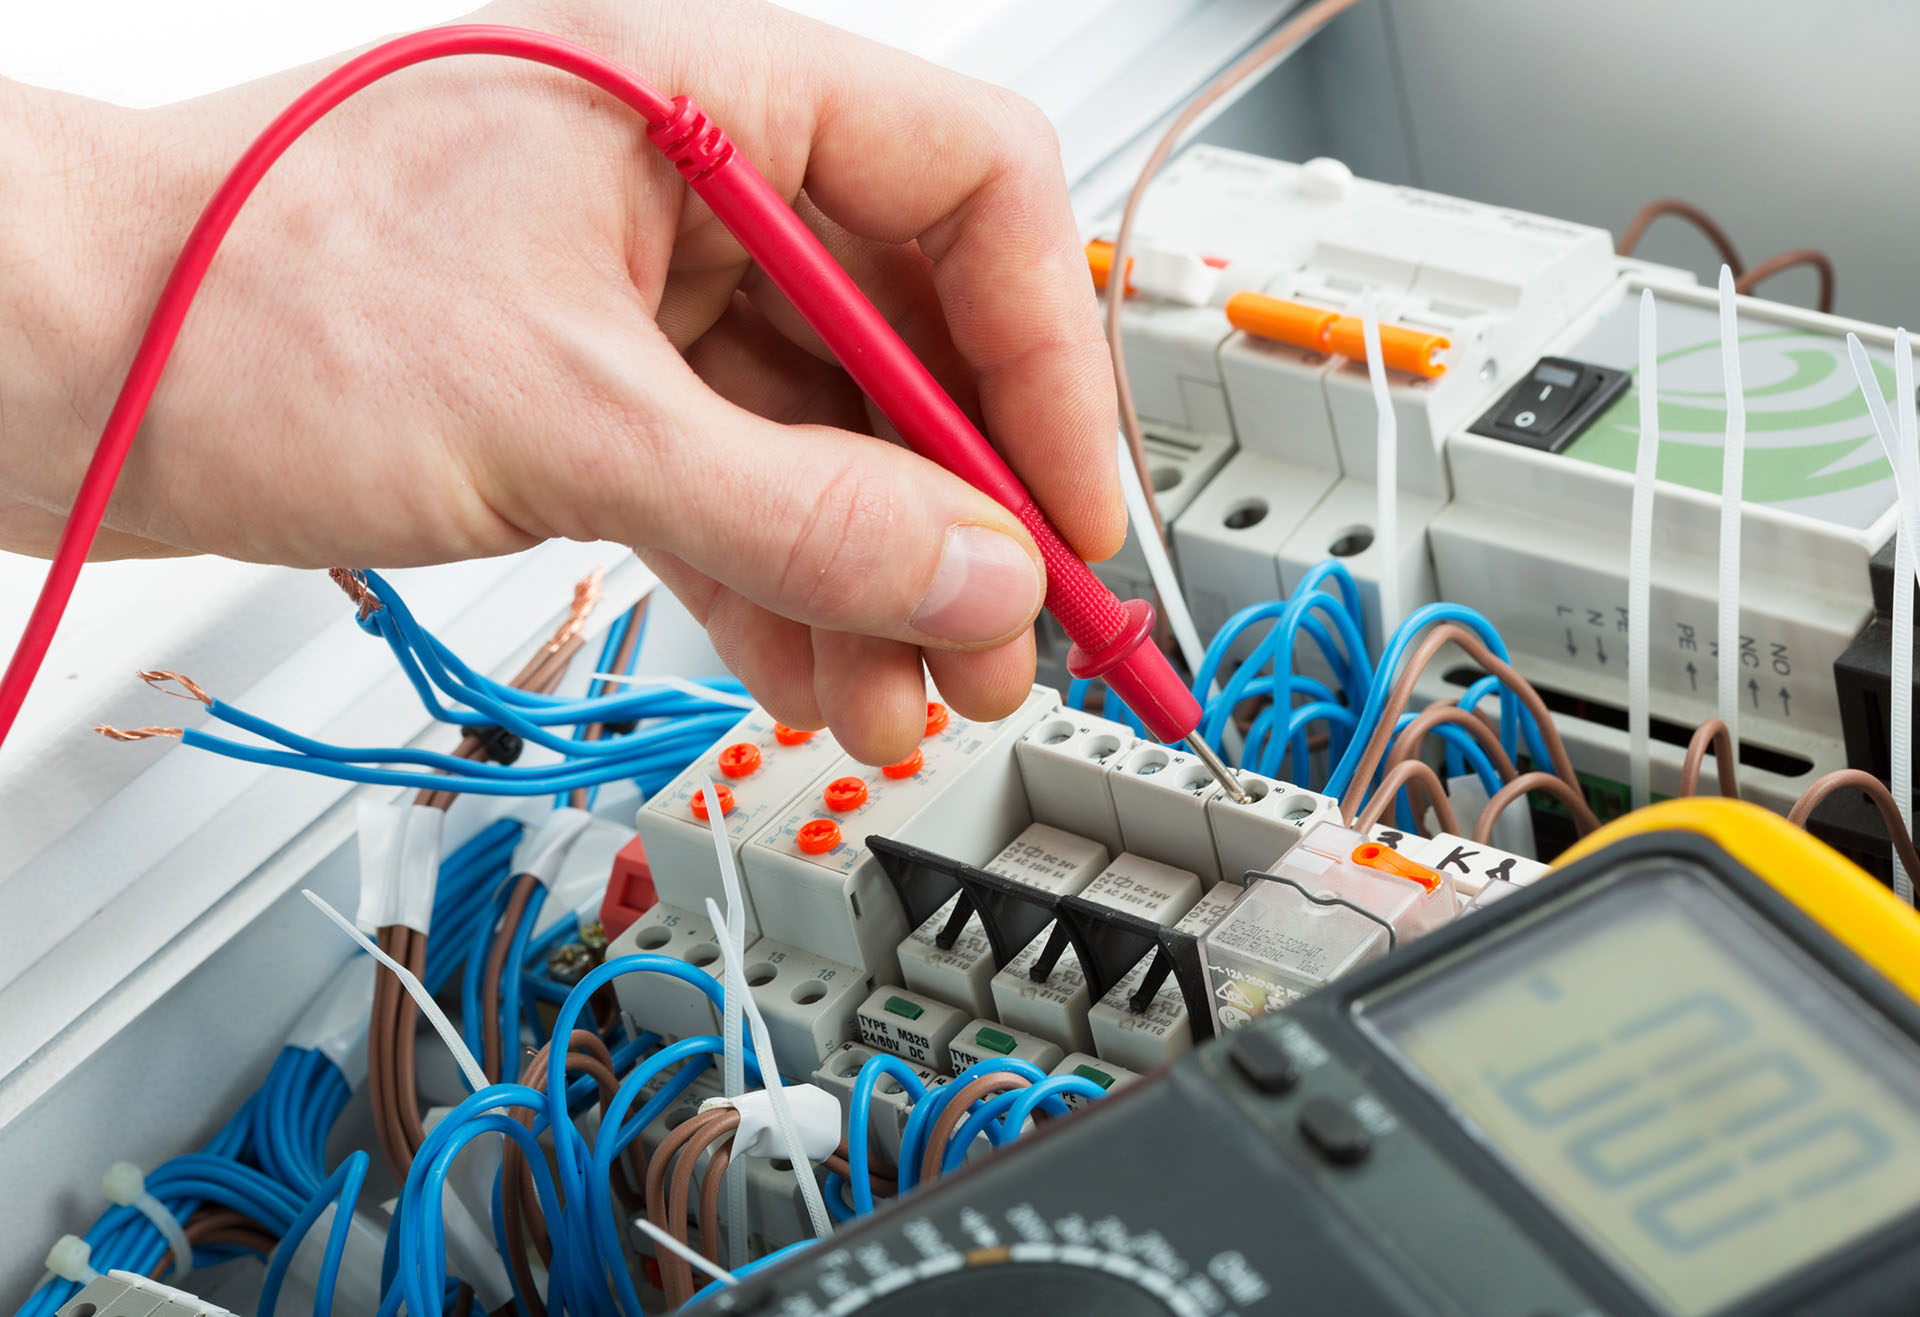 Are you in need of Electrical Services in Elgin SC? We're here to help! Get peace of mind to call us.
